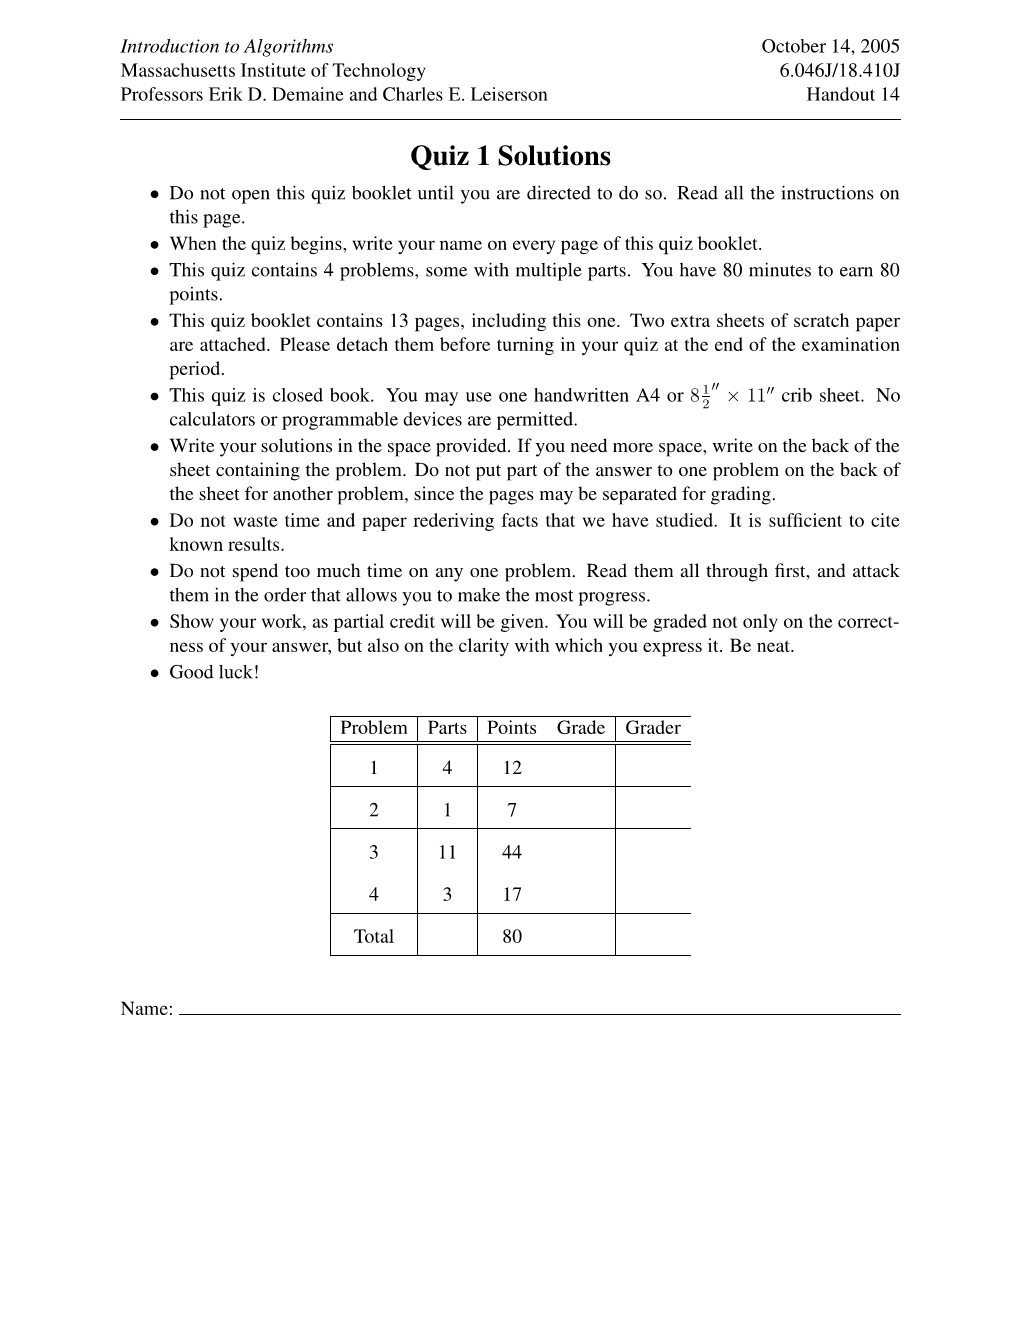 Quiz 1 Solutions Do Not Open This Quiz Booklet Until You Are Directed to Do So